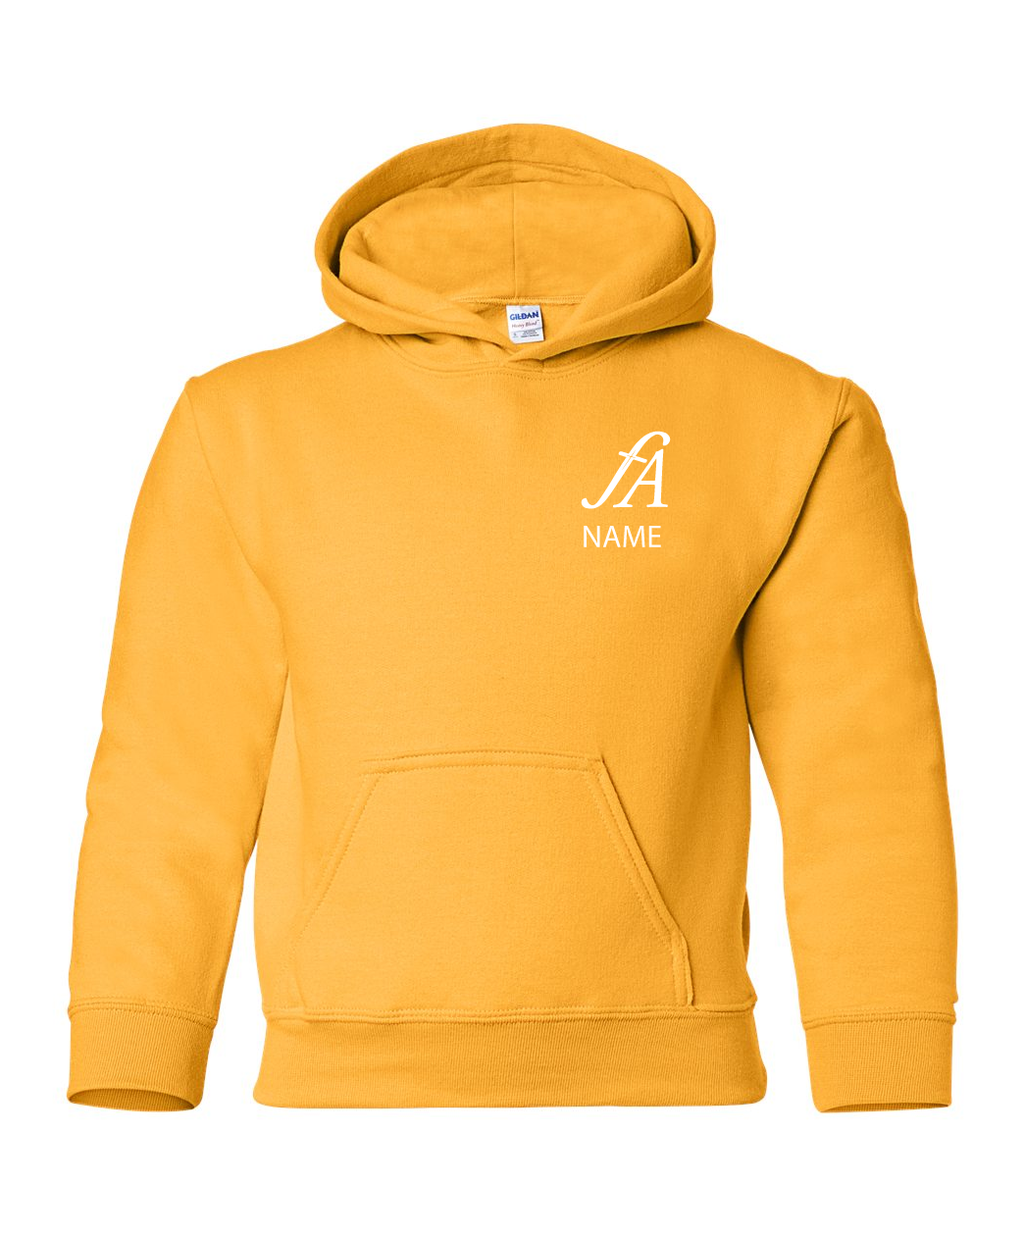 First Addition - Youth and Adult Hooded Sweatshirt (3rd Grade)